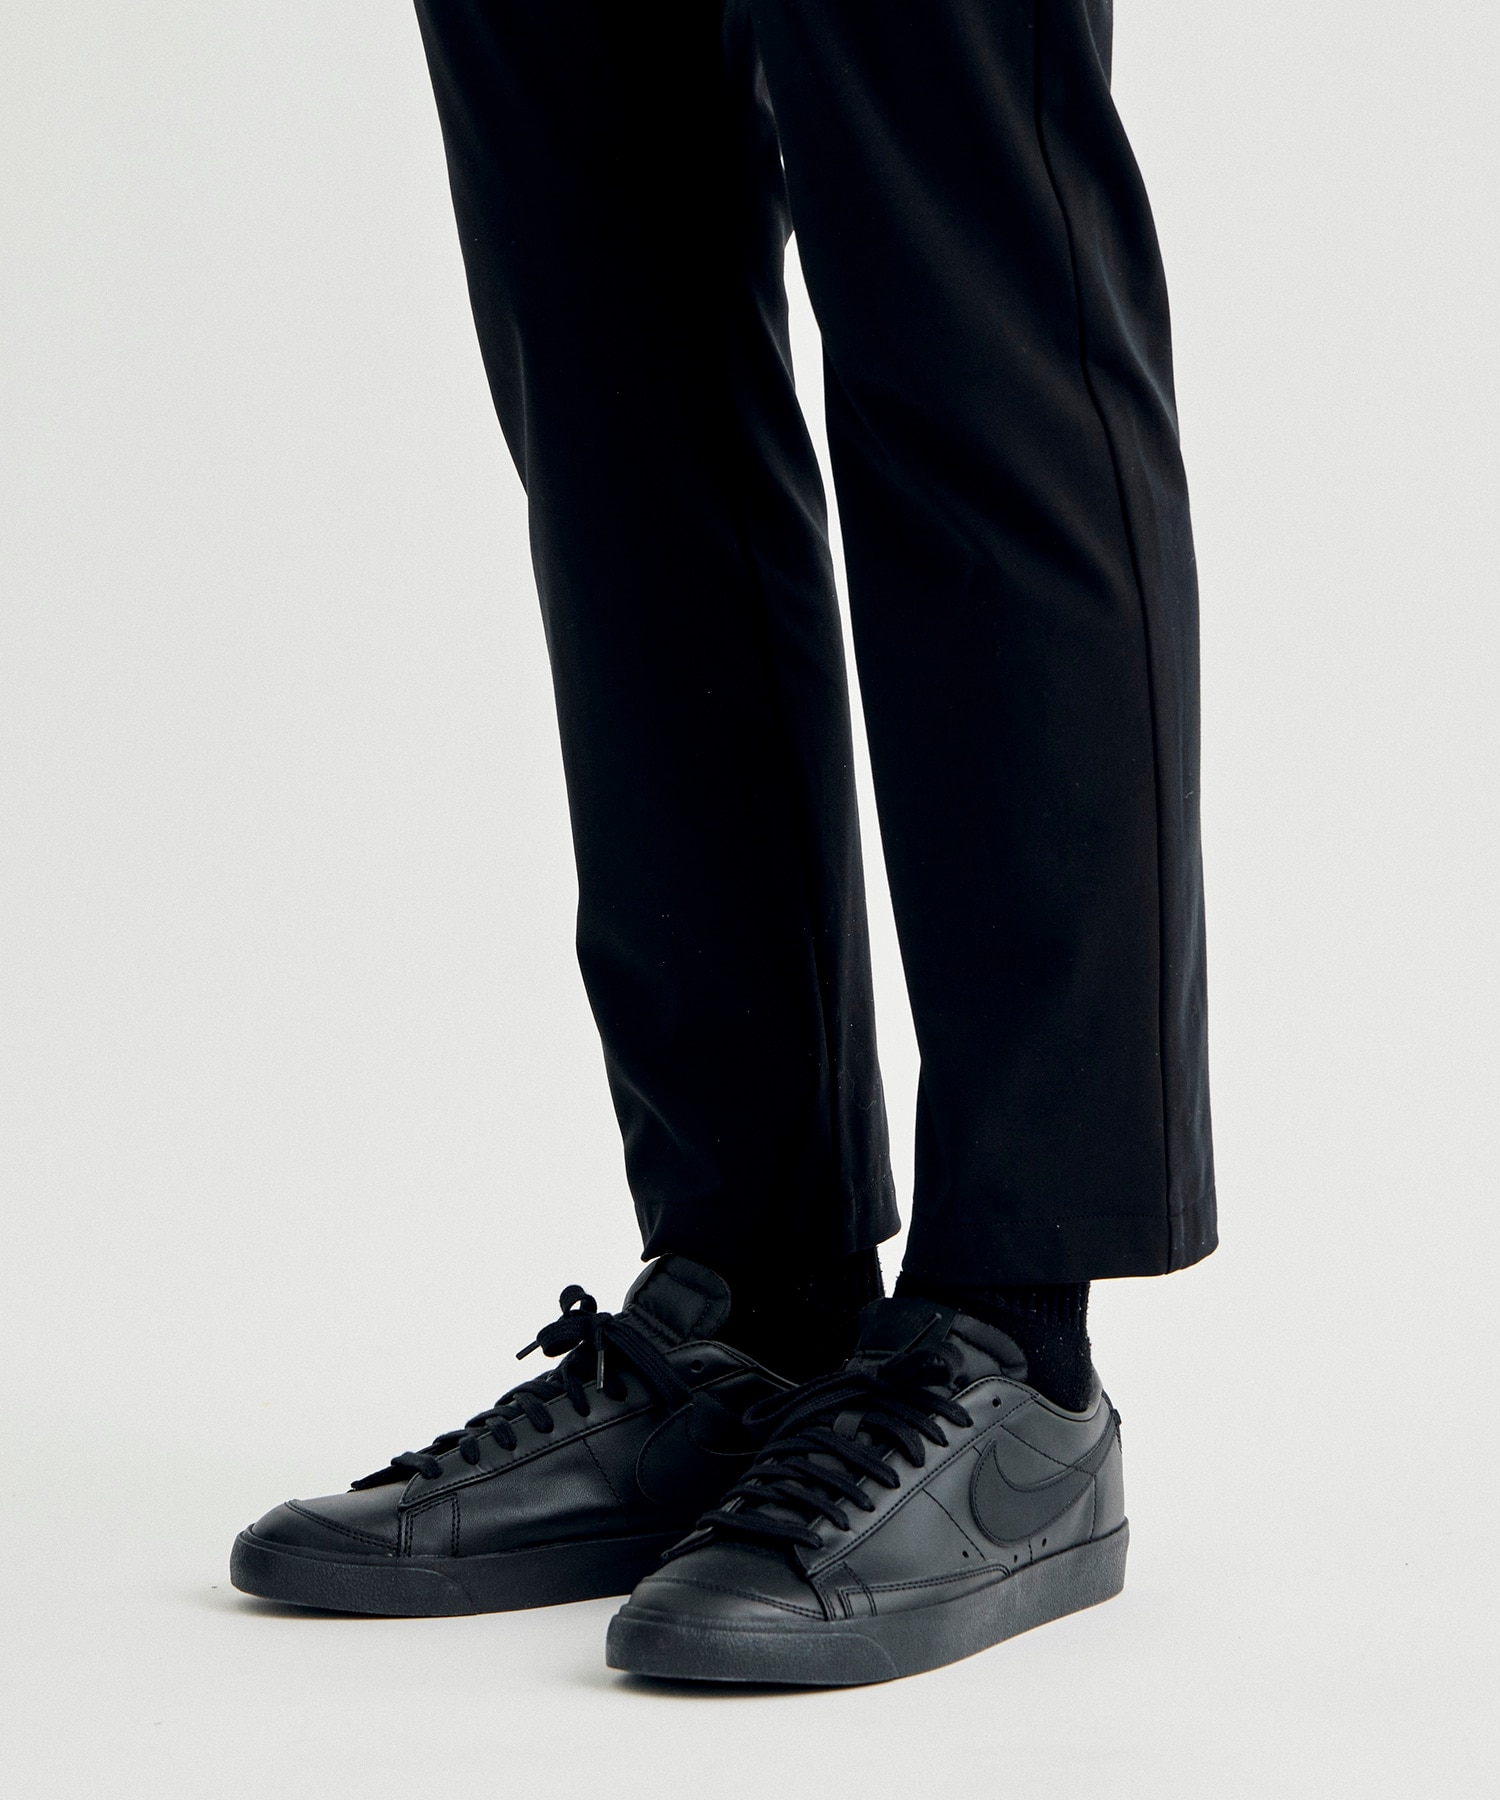 EX.NY/CO STRETCH JERSEY RF EASY TROUSERS ATTACHMENT